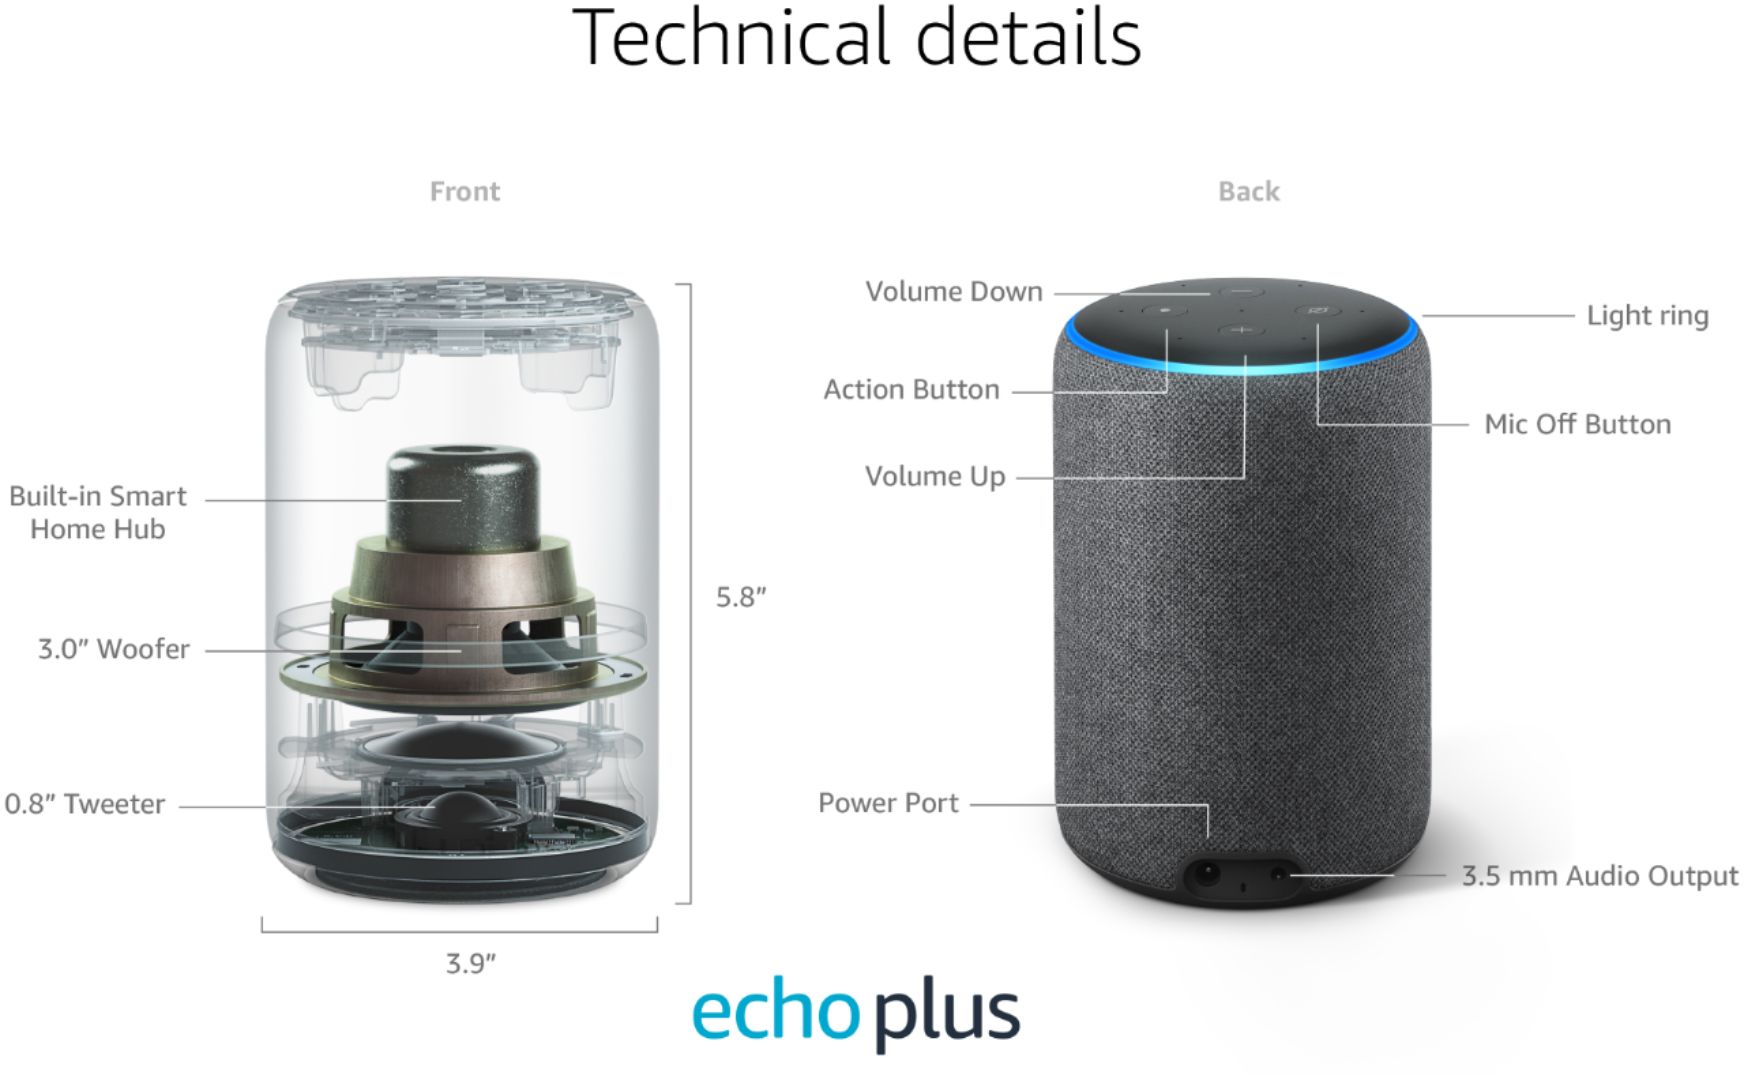 2nd Gen Amazon Echo Plus with a built-in smart home hub 